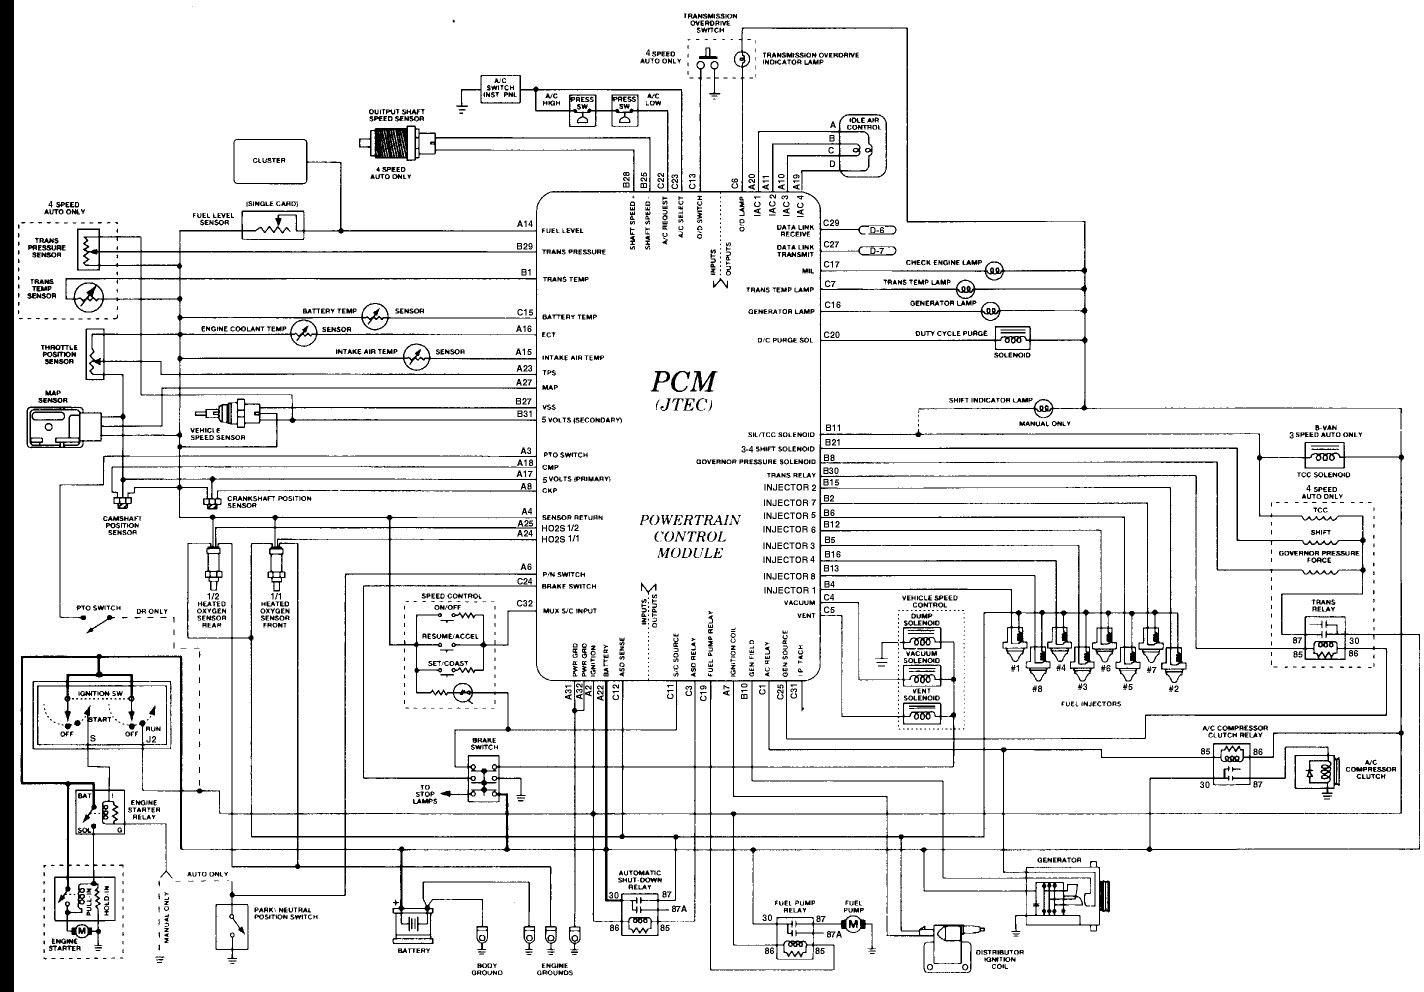 Wiring Diagram For 2001 Dodge Ram 2500 from mainetreasurechest.com